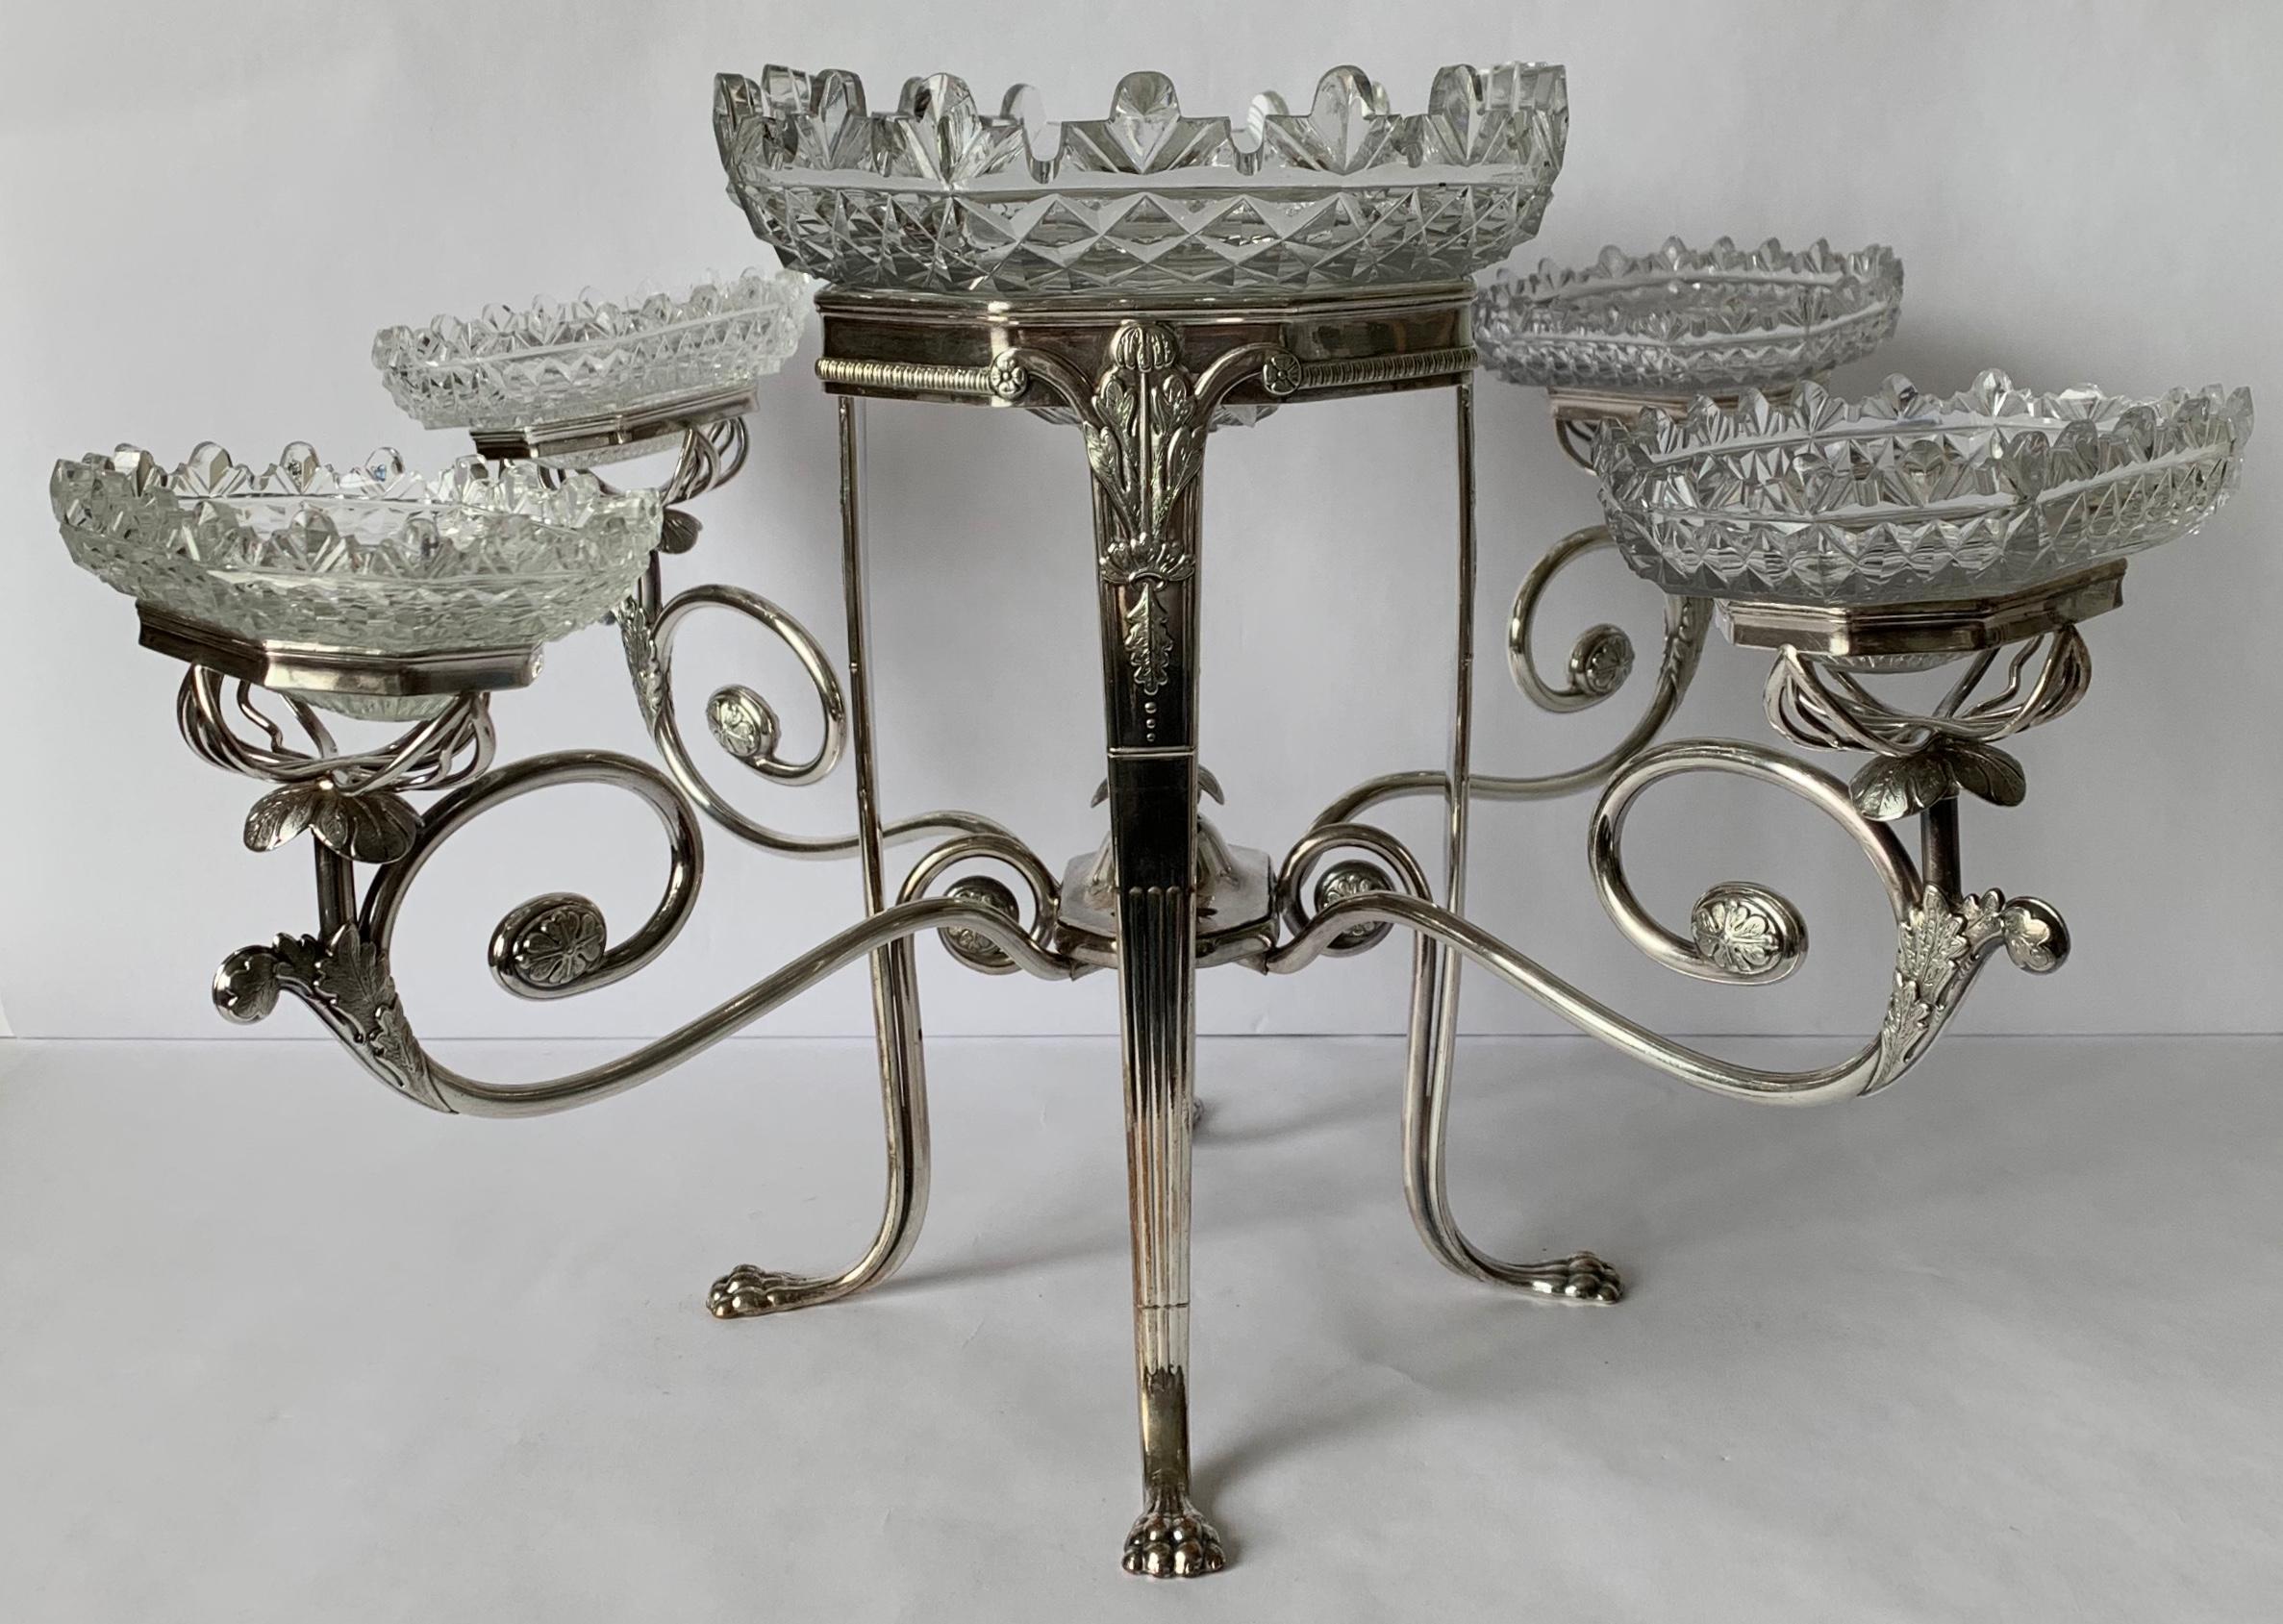 Antique English Silver Plated and Cut Glass Epergne For Sale 3